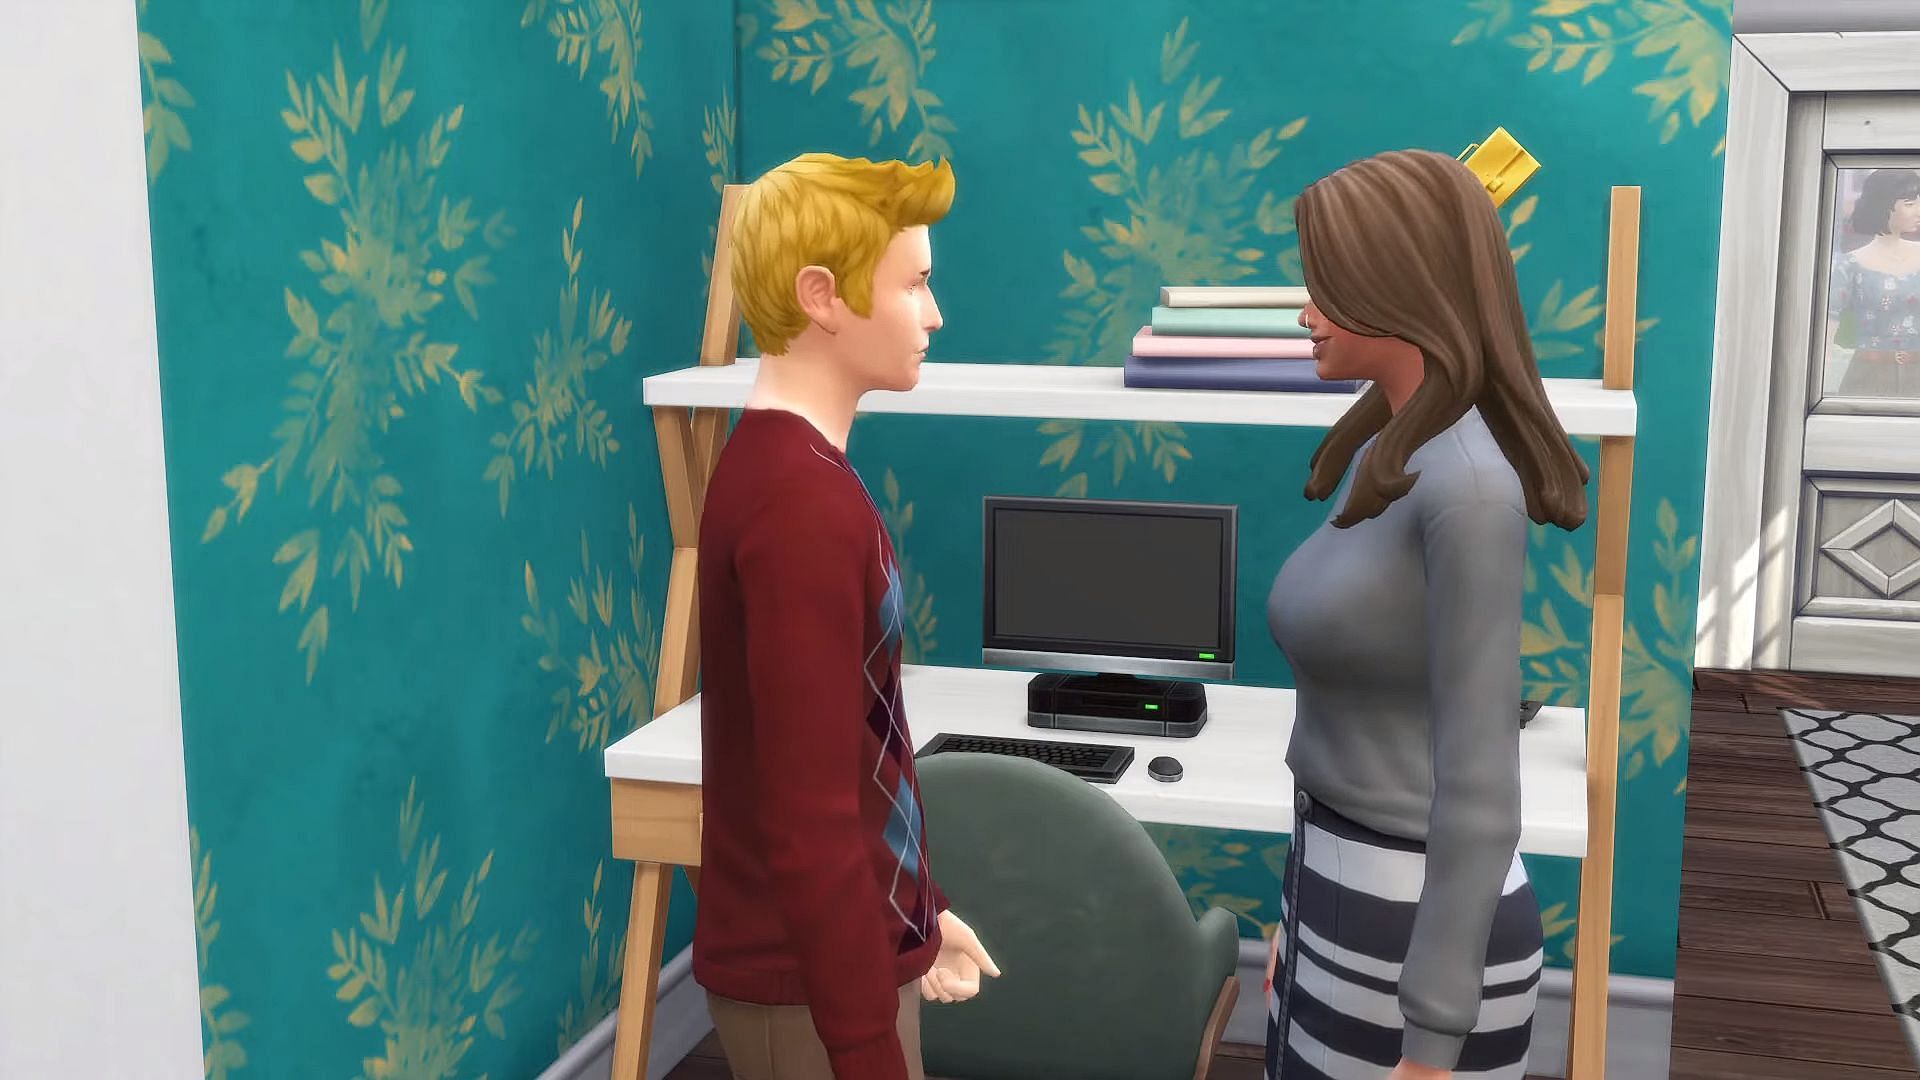 In order to save time, players can edit relationships in the Sims 4.